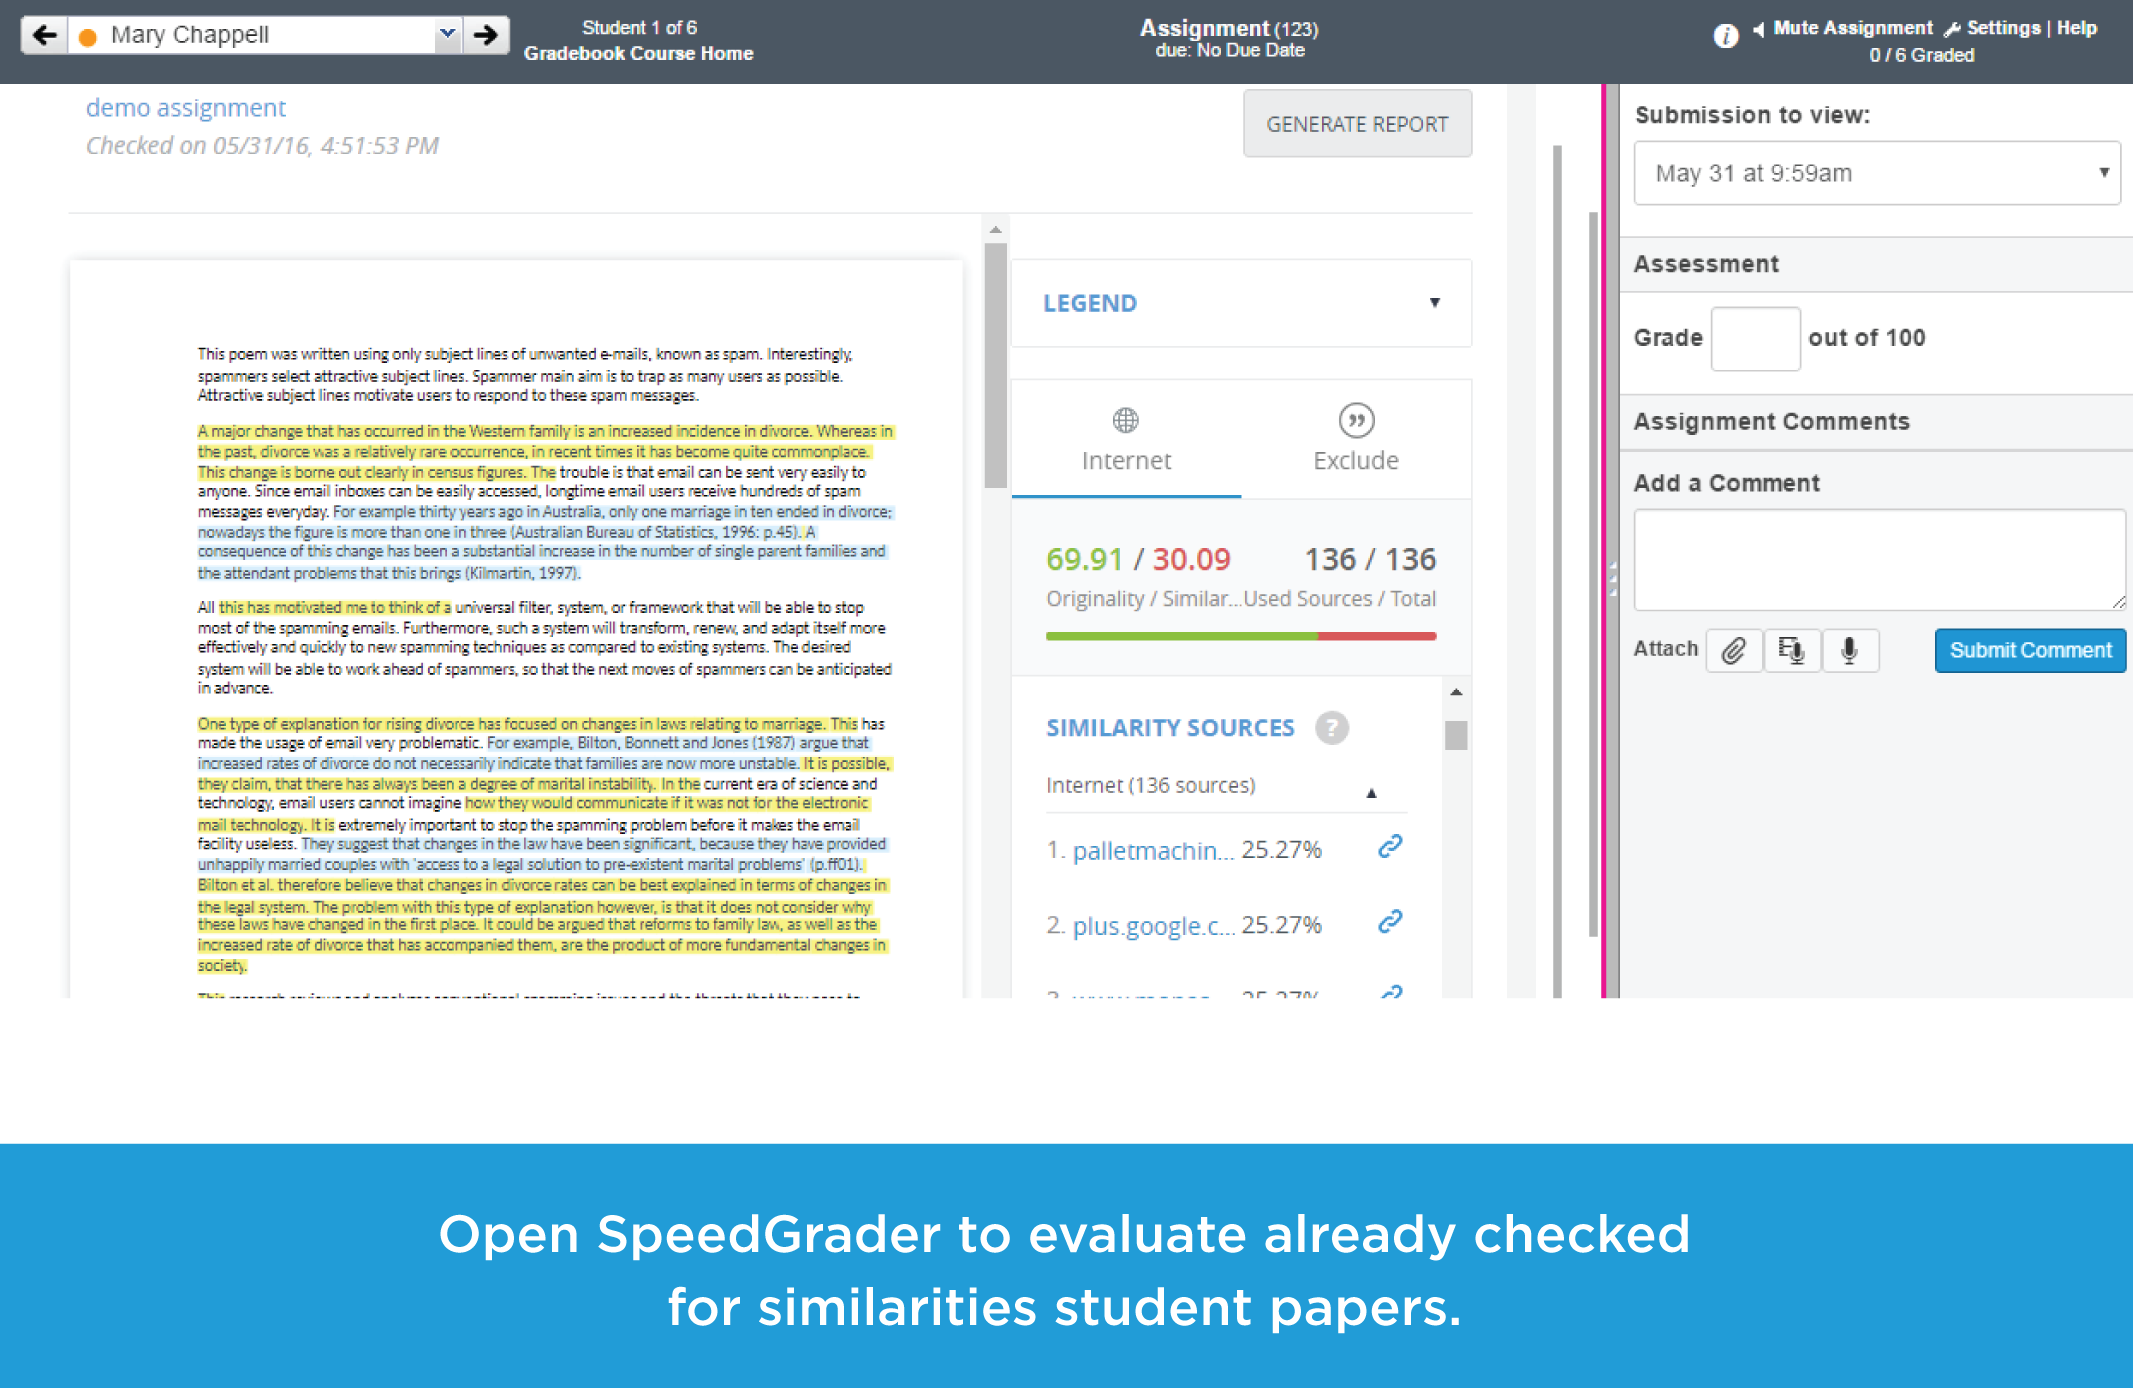 Unplag allows using SpeedGrader to grade papers checked for plagiarism